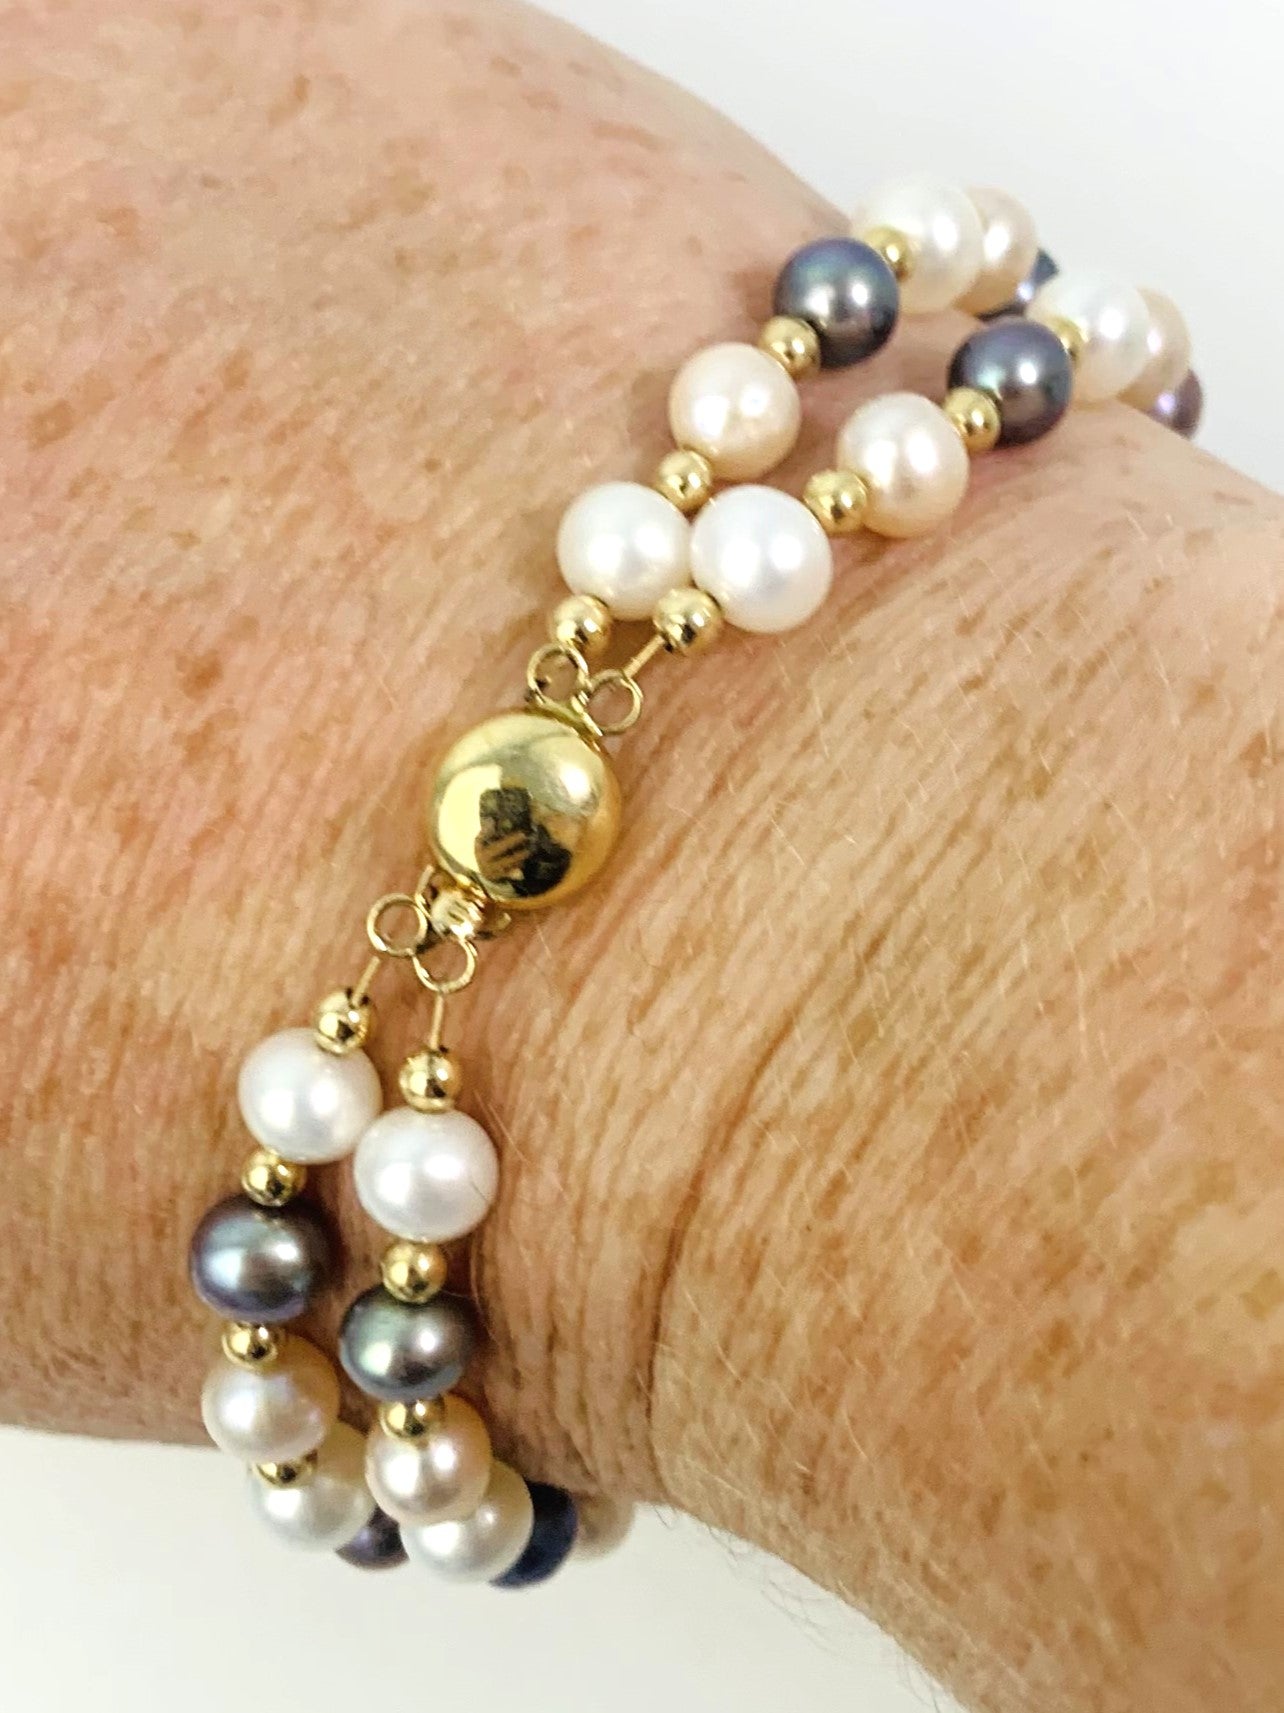 Clearance Sale! - 7.75" Double Row Pearl Bracelet in 14KY - BRC-020-DBLPRL14Y-MLTI-7.75